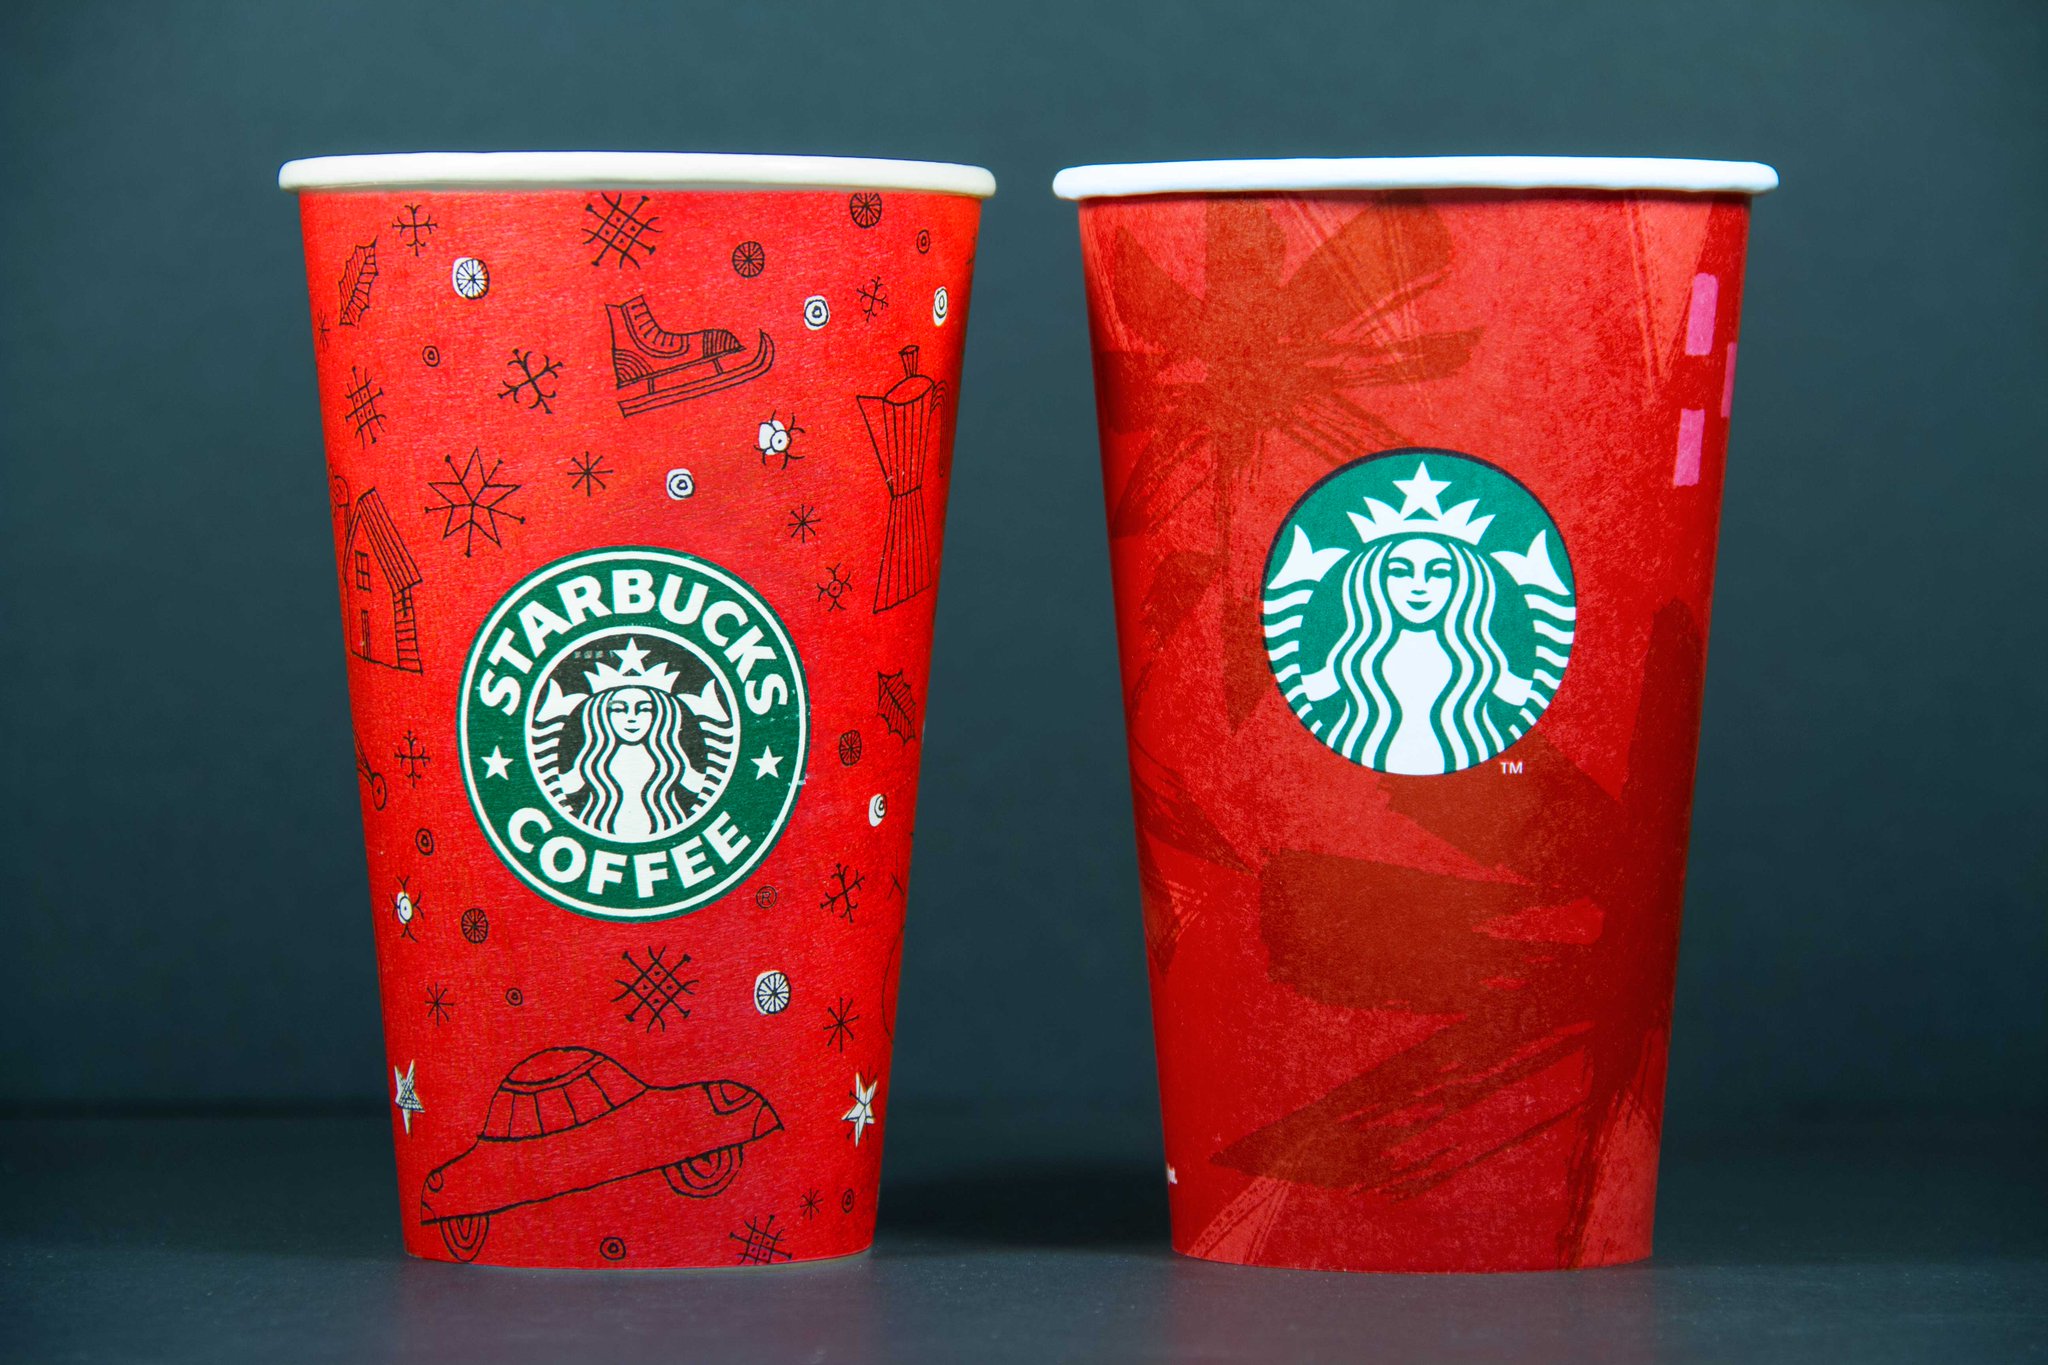 “#Starbucks Red Cups from 1999 and today. #tbt http://t.co/LXYJdP2RIk” .